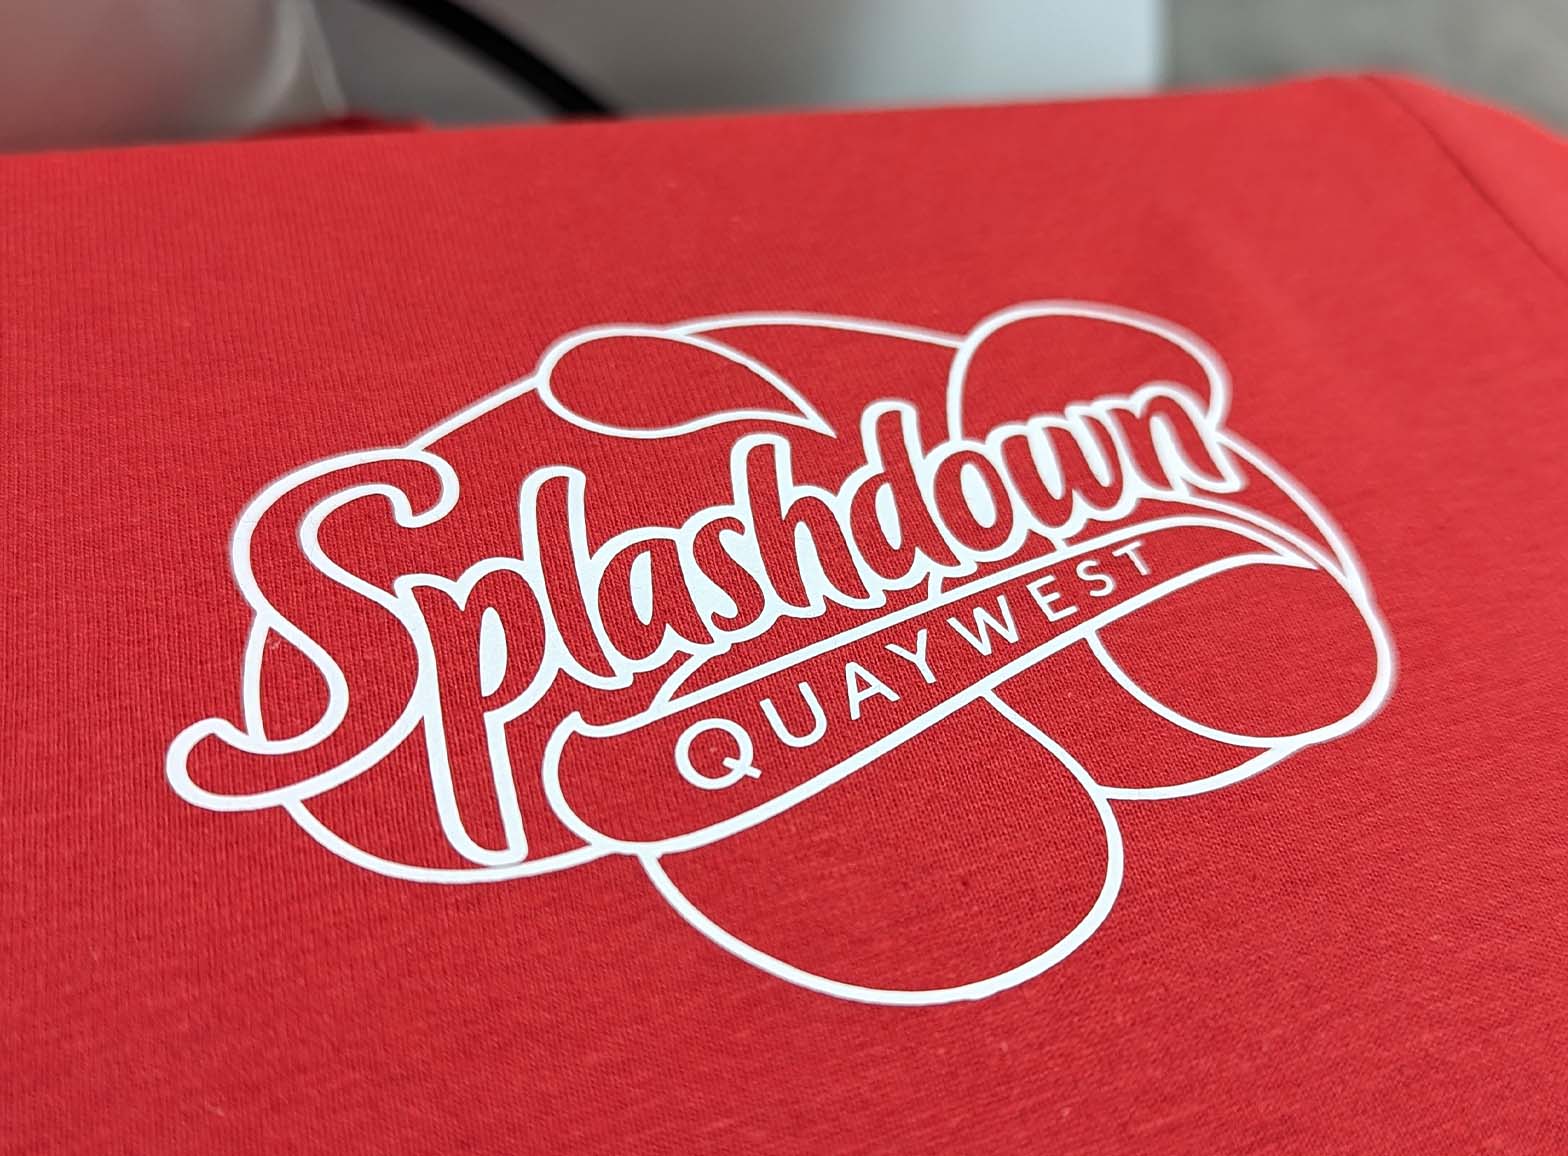 A photo of the Full Colour Vinyl Print process for a job for Splashdown, completed by Clothing Your Way in Paignton, South Devon.